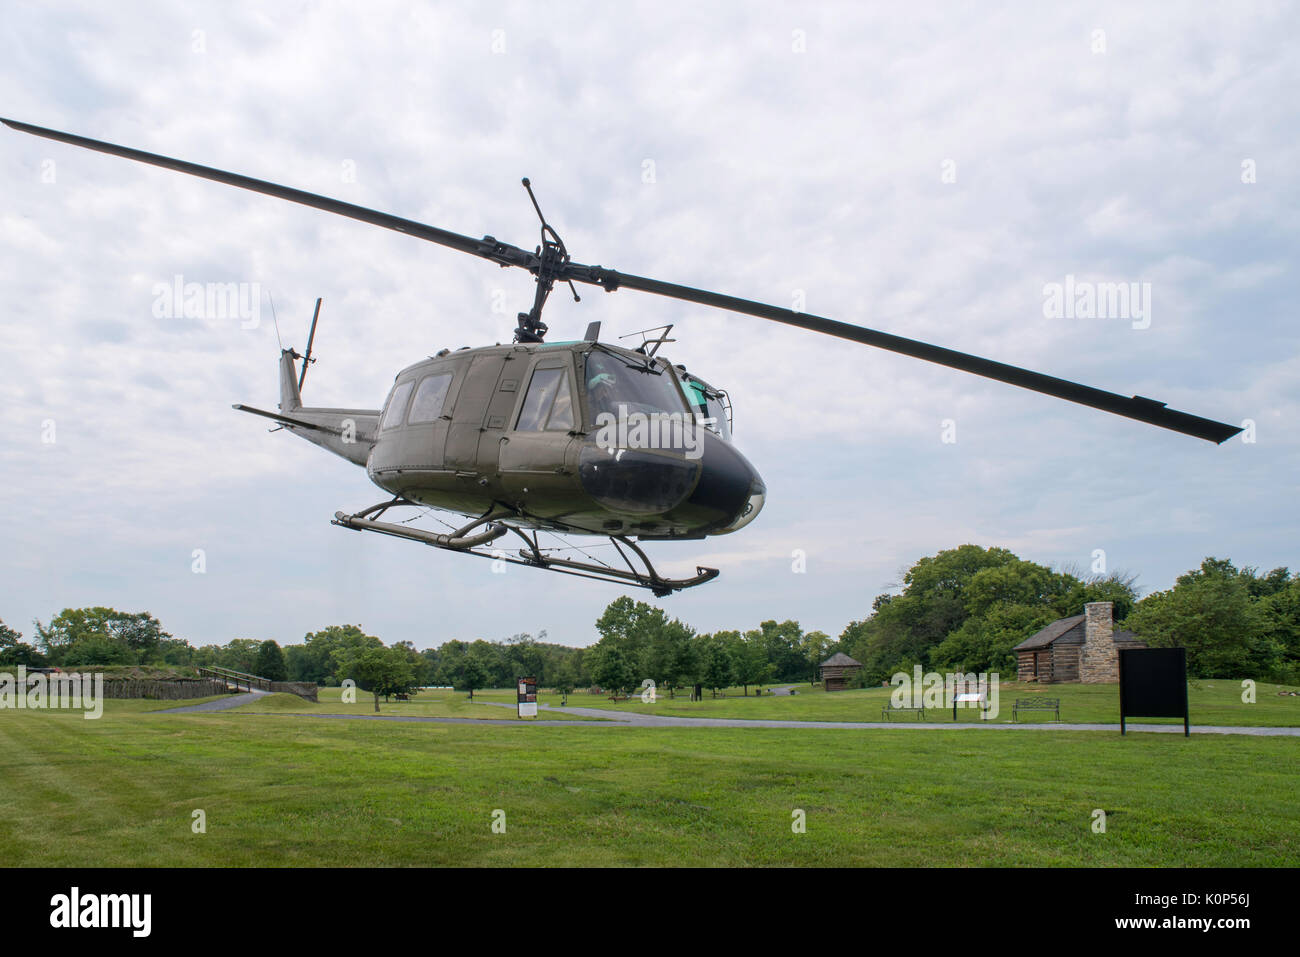 Vietnam Air Mobile Helicopter At The US Army Heritage And Education Center Carlisle, PA Stock Photo